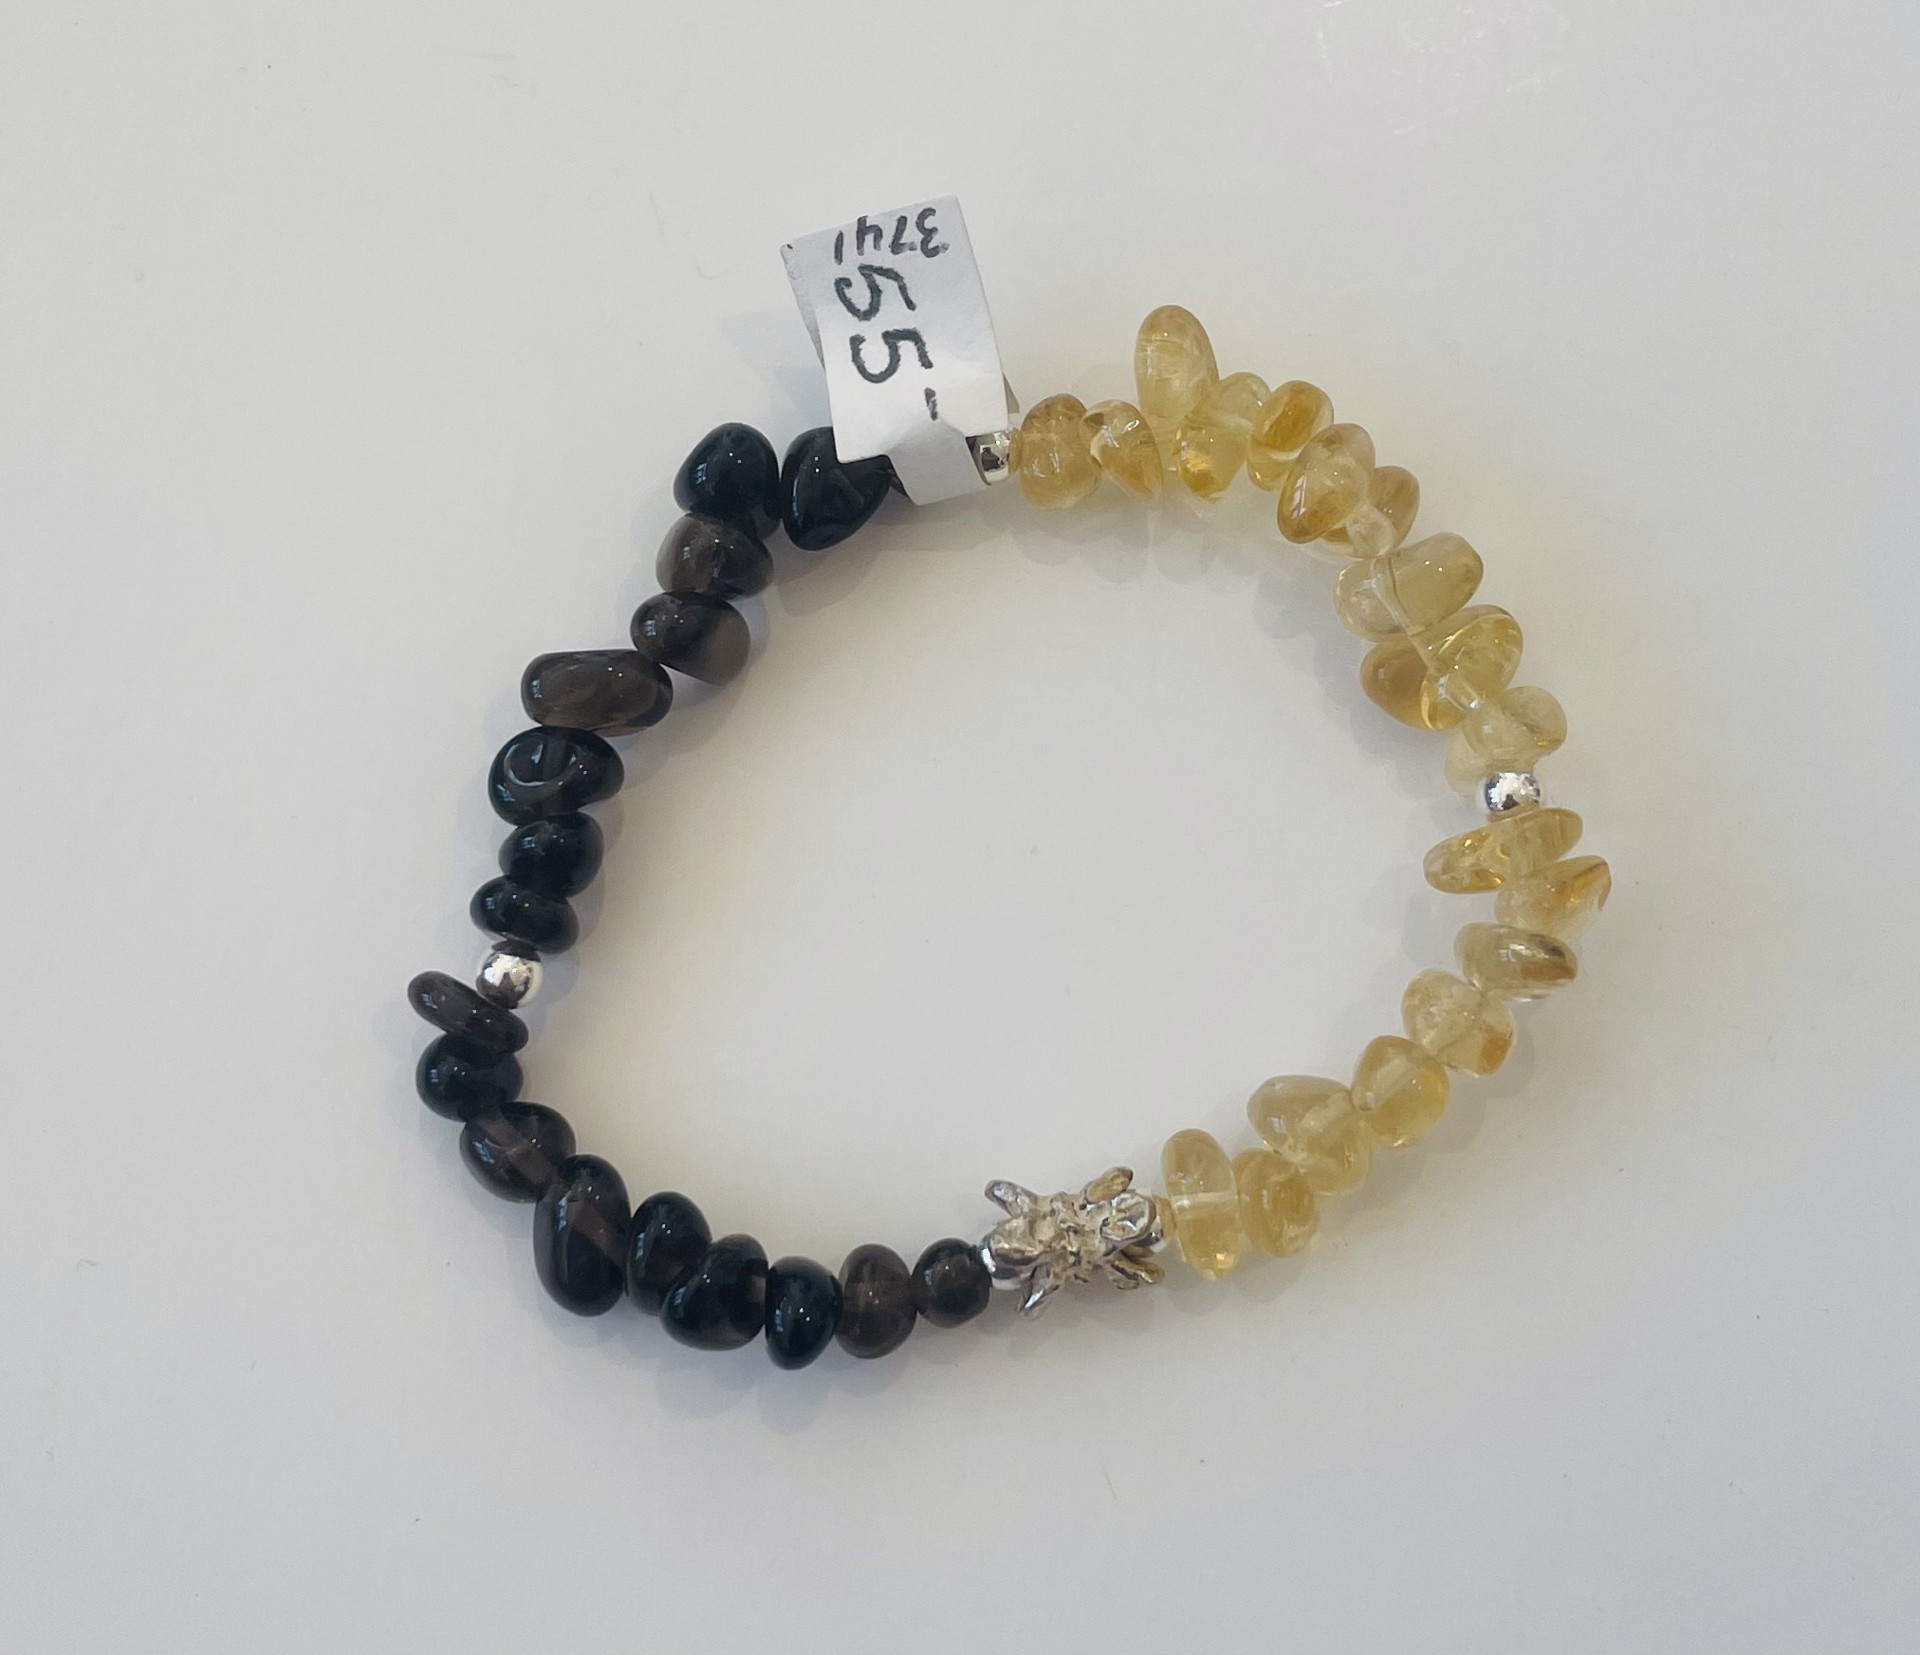 Citrine and Smoky Quartz with Sterling Bead Bracelet by Emelie Hebert